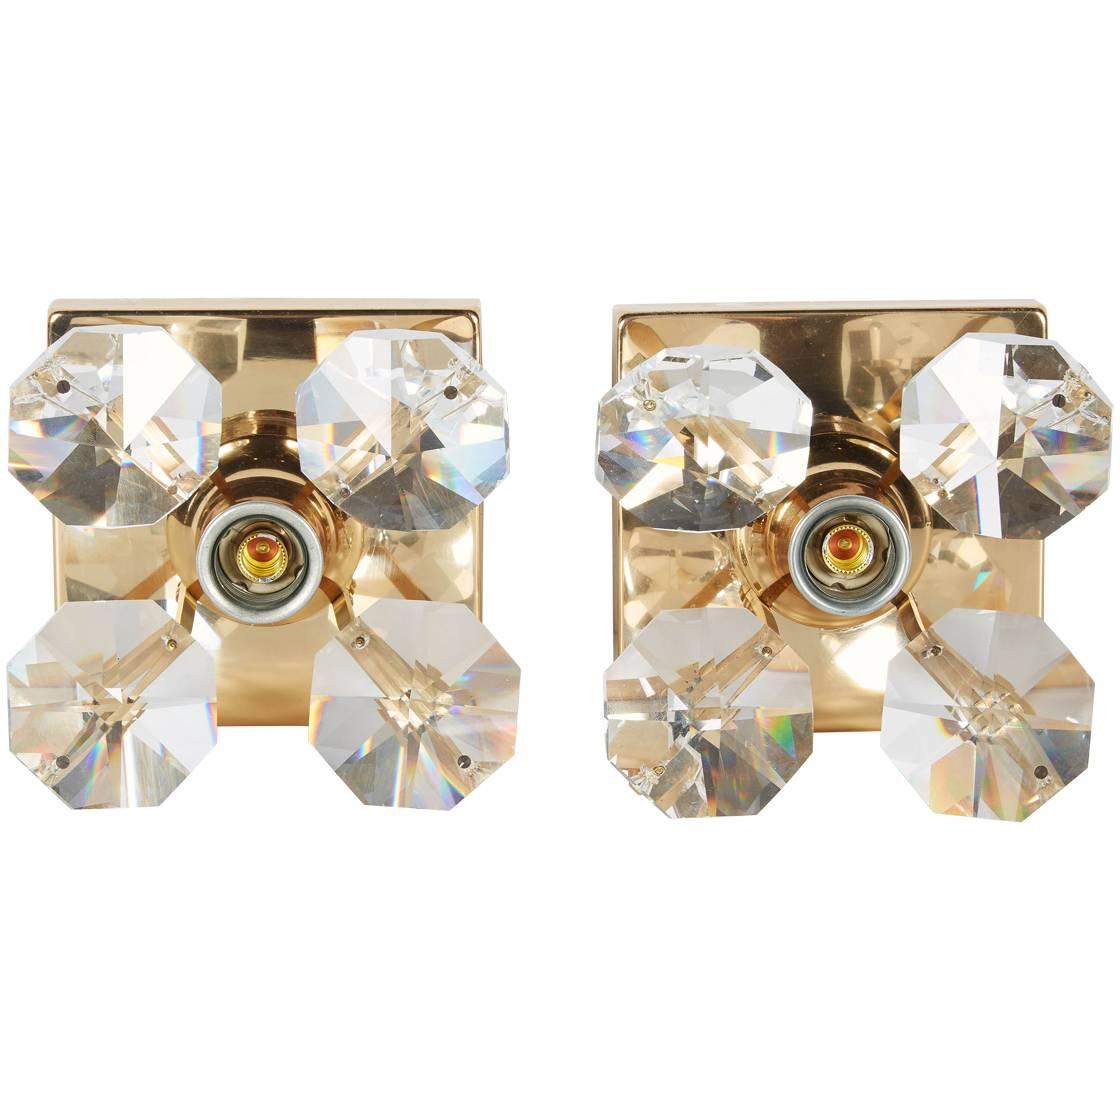 Pair of Mid-Century Modern gold plated sconces with large cut crystals and cylinder stems, creating the form of a flower. Each sconce is fitted with one center light allowing the light bulb of choice to contribute to the floral design. Exquisite and